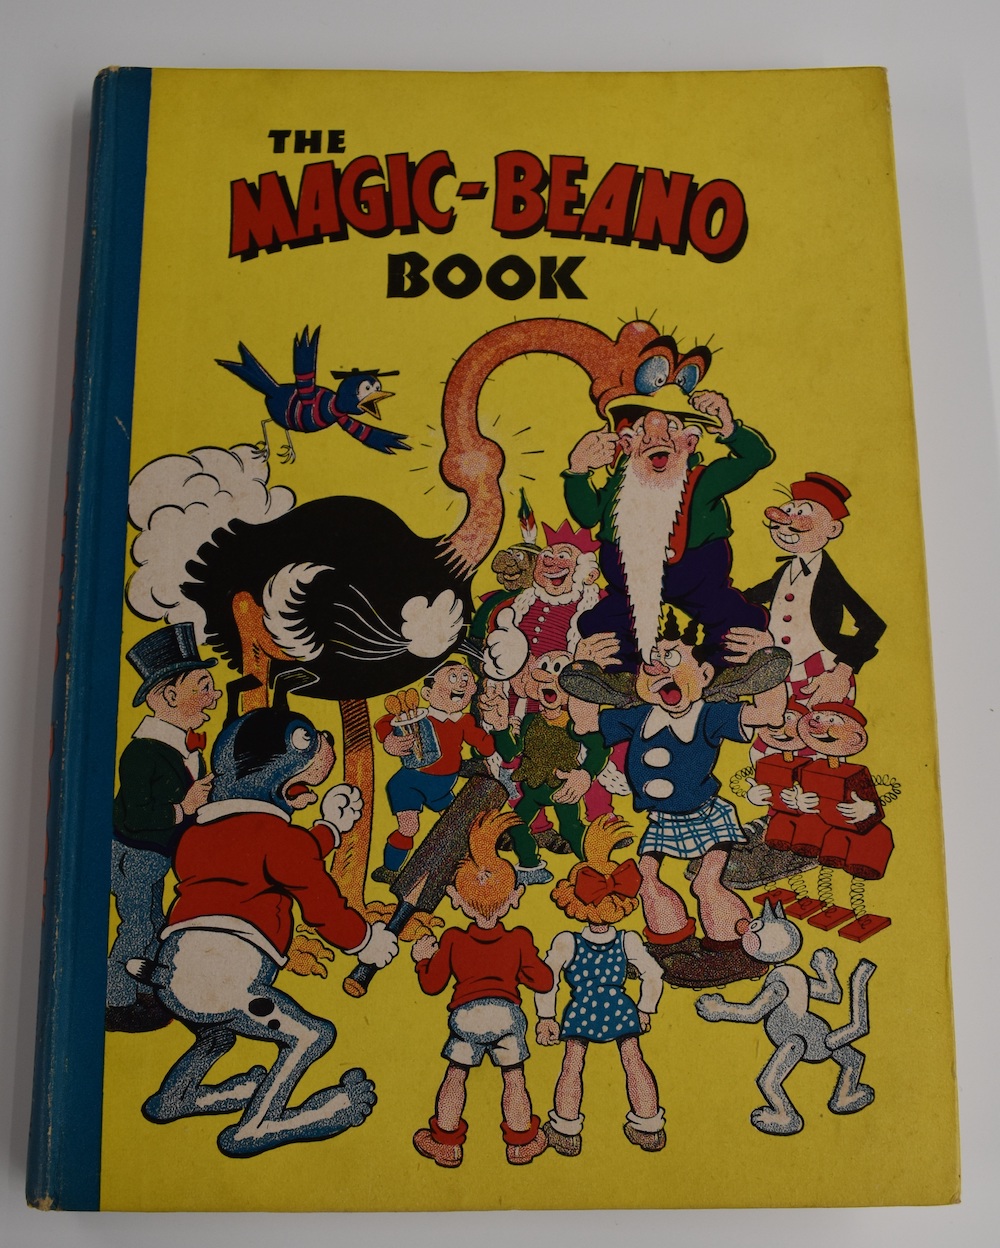 The Magic Beano Book (1947) First Edition D.C. Thompson, Big Eggo Cover, Bright Boards With Dedication Page Clear Of Inscription HAMMER Ś480